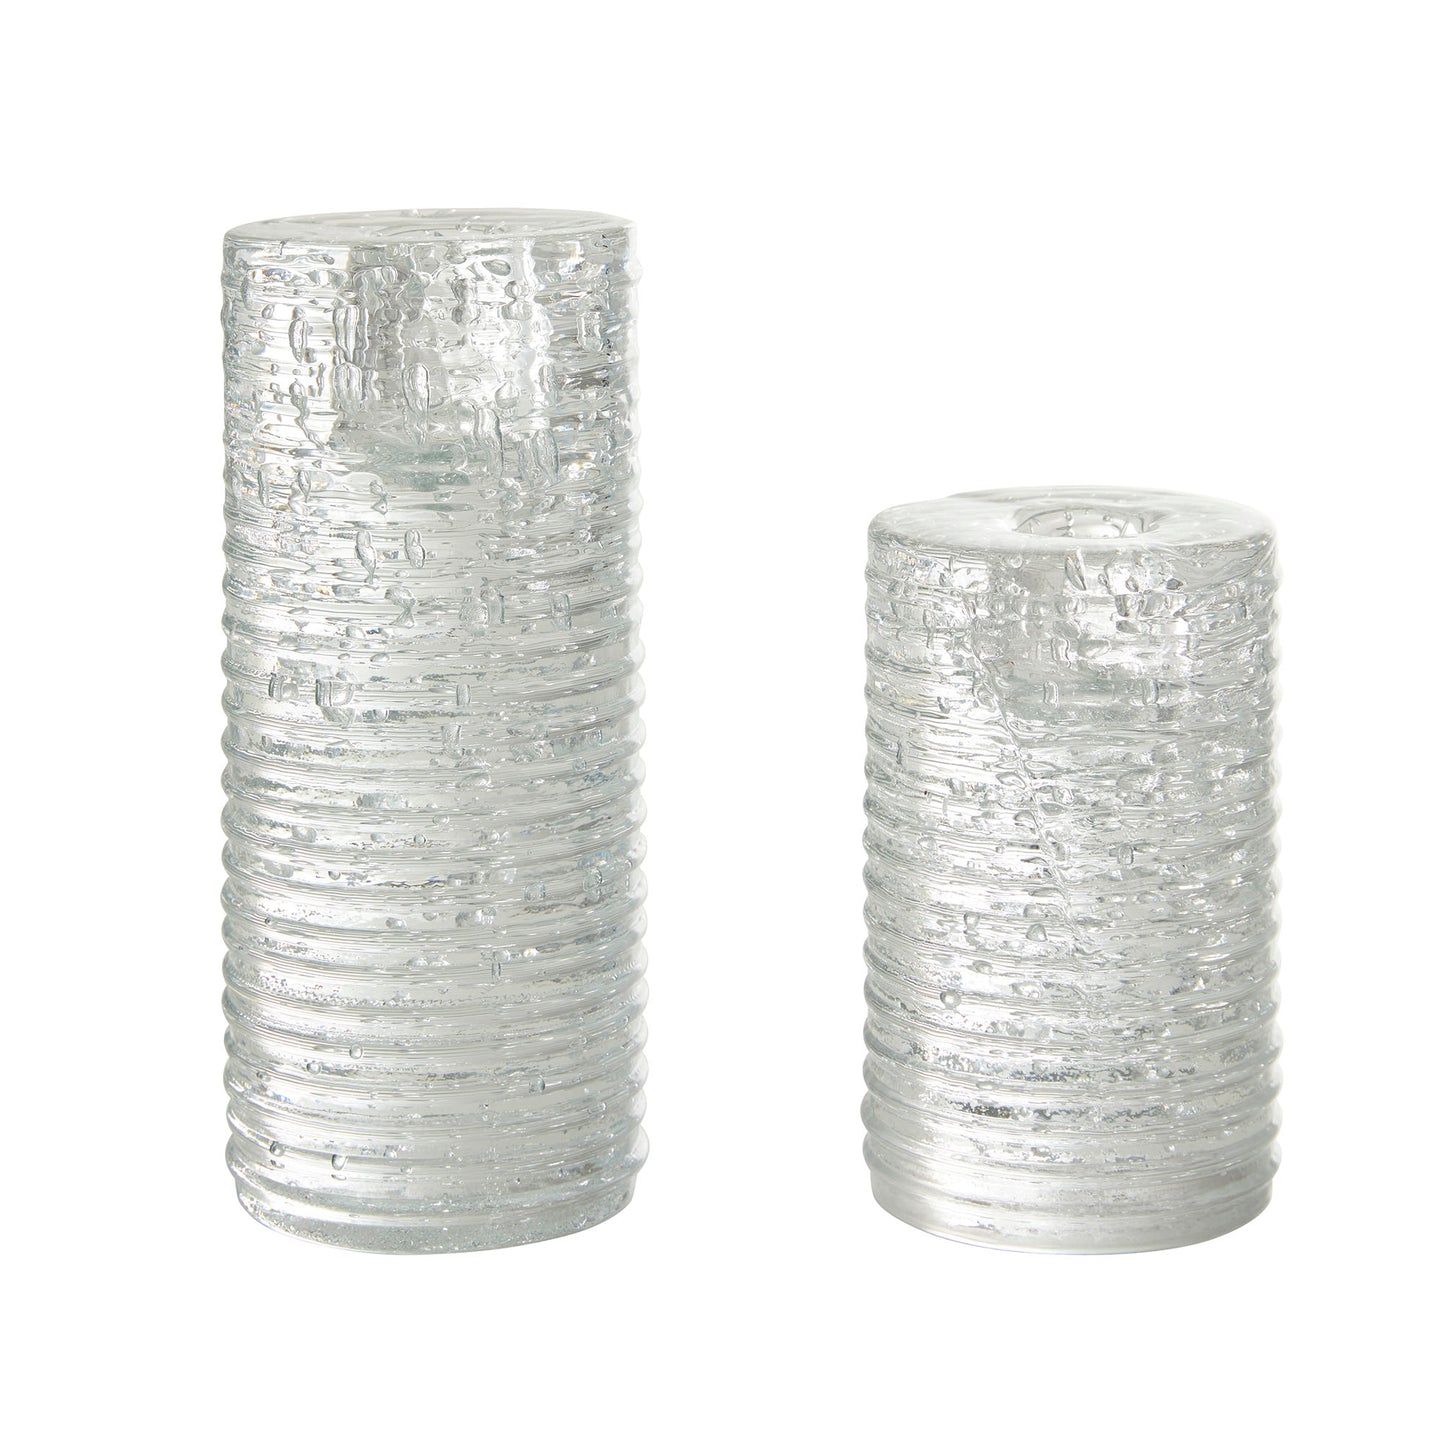 Kendir Candleholders Set of 2 - Contemporary Marble and Steel